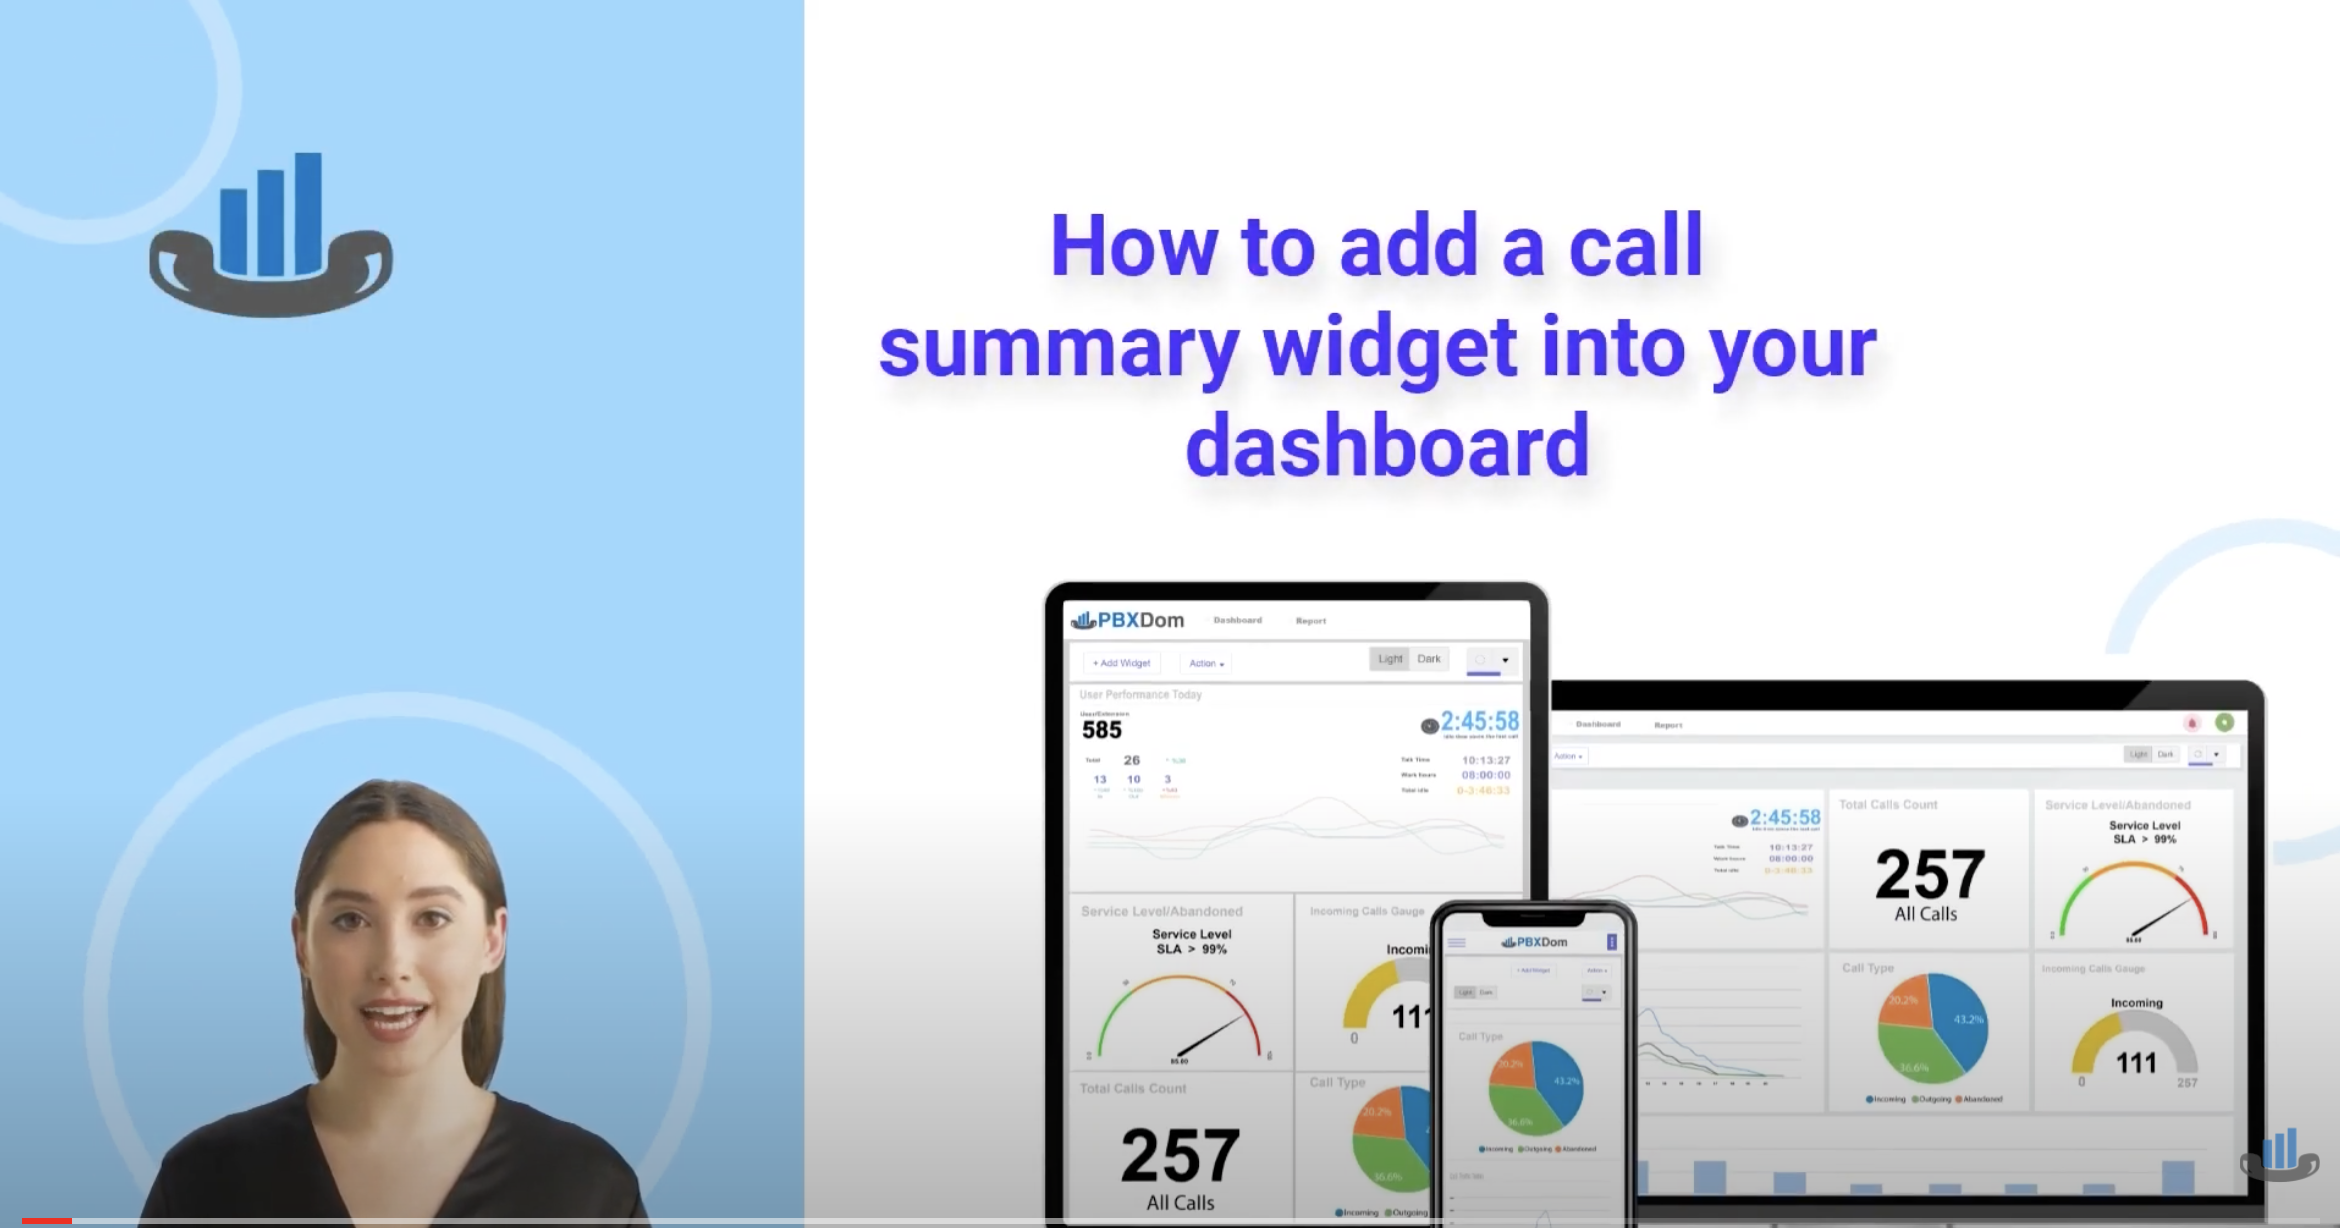 How to add a call summary widget into your dashboard